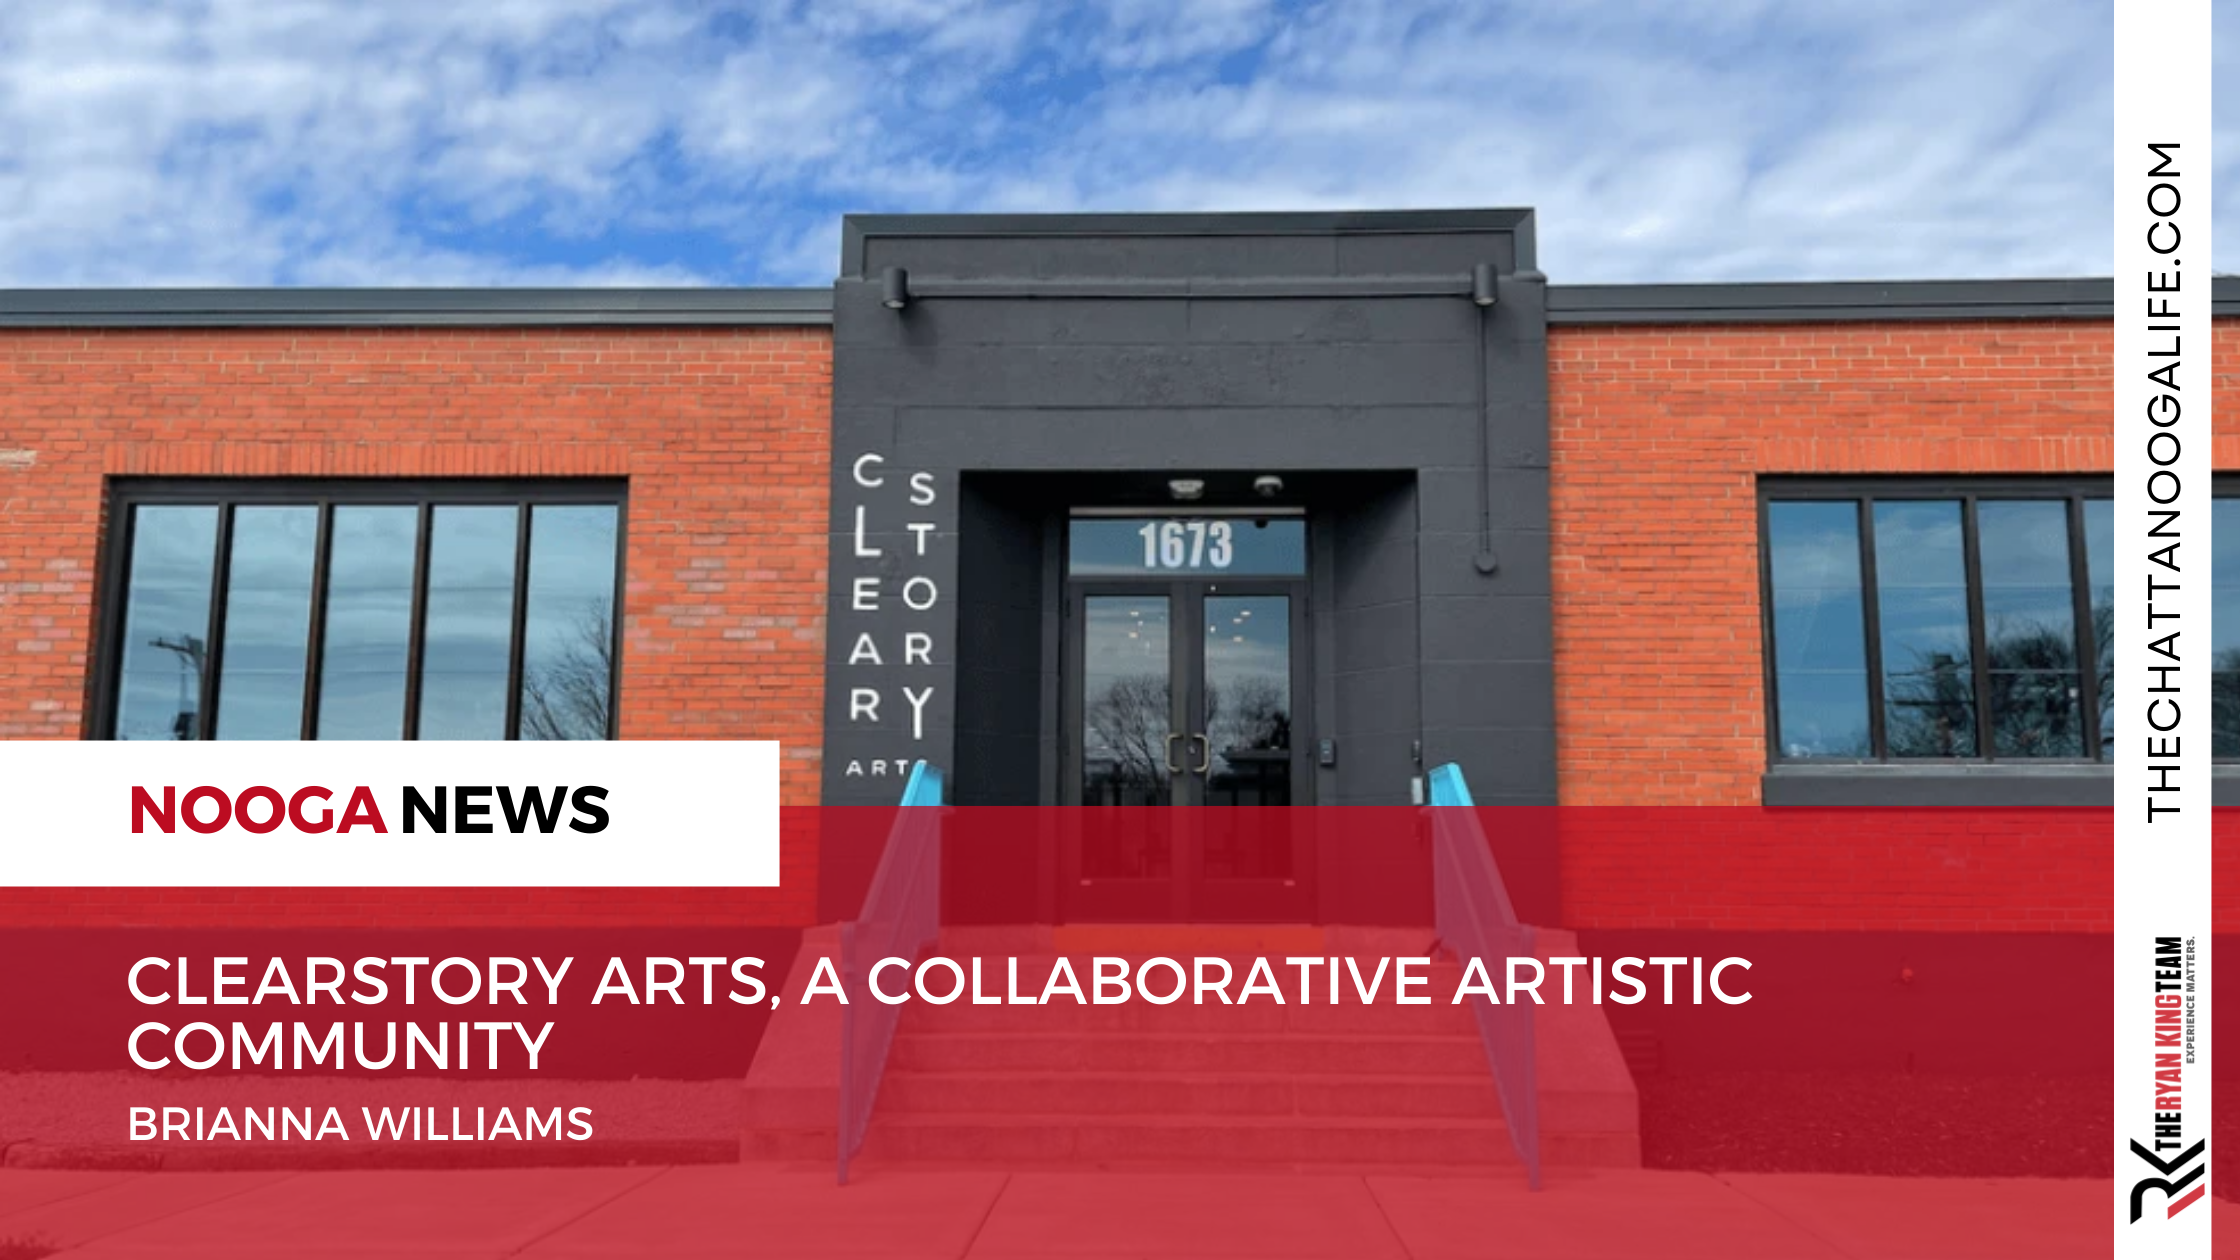 Clear Story Arts, a collaborative artistic community